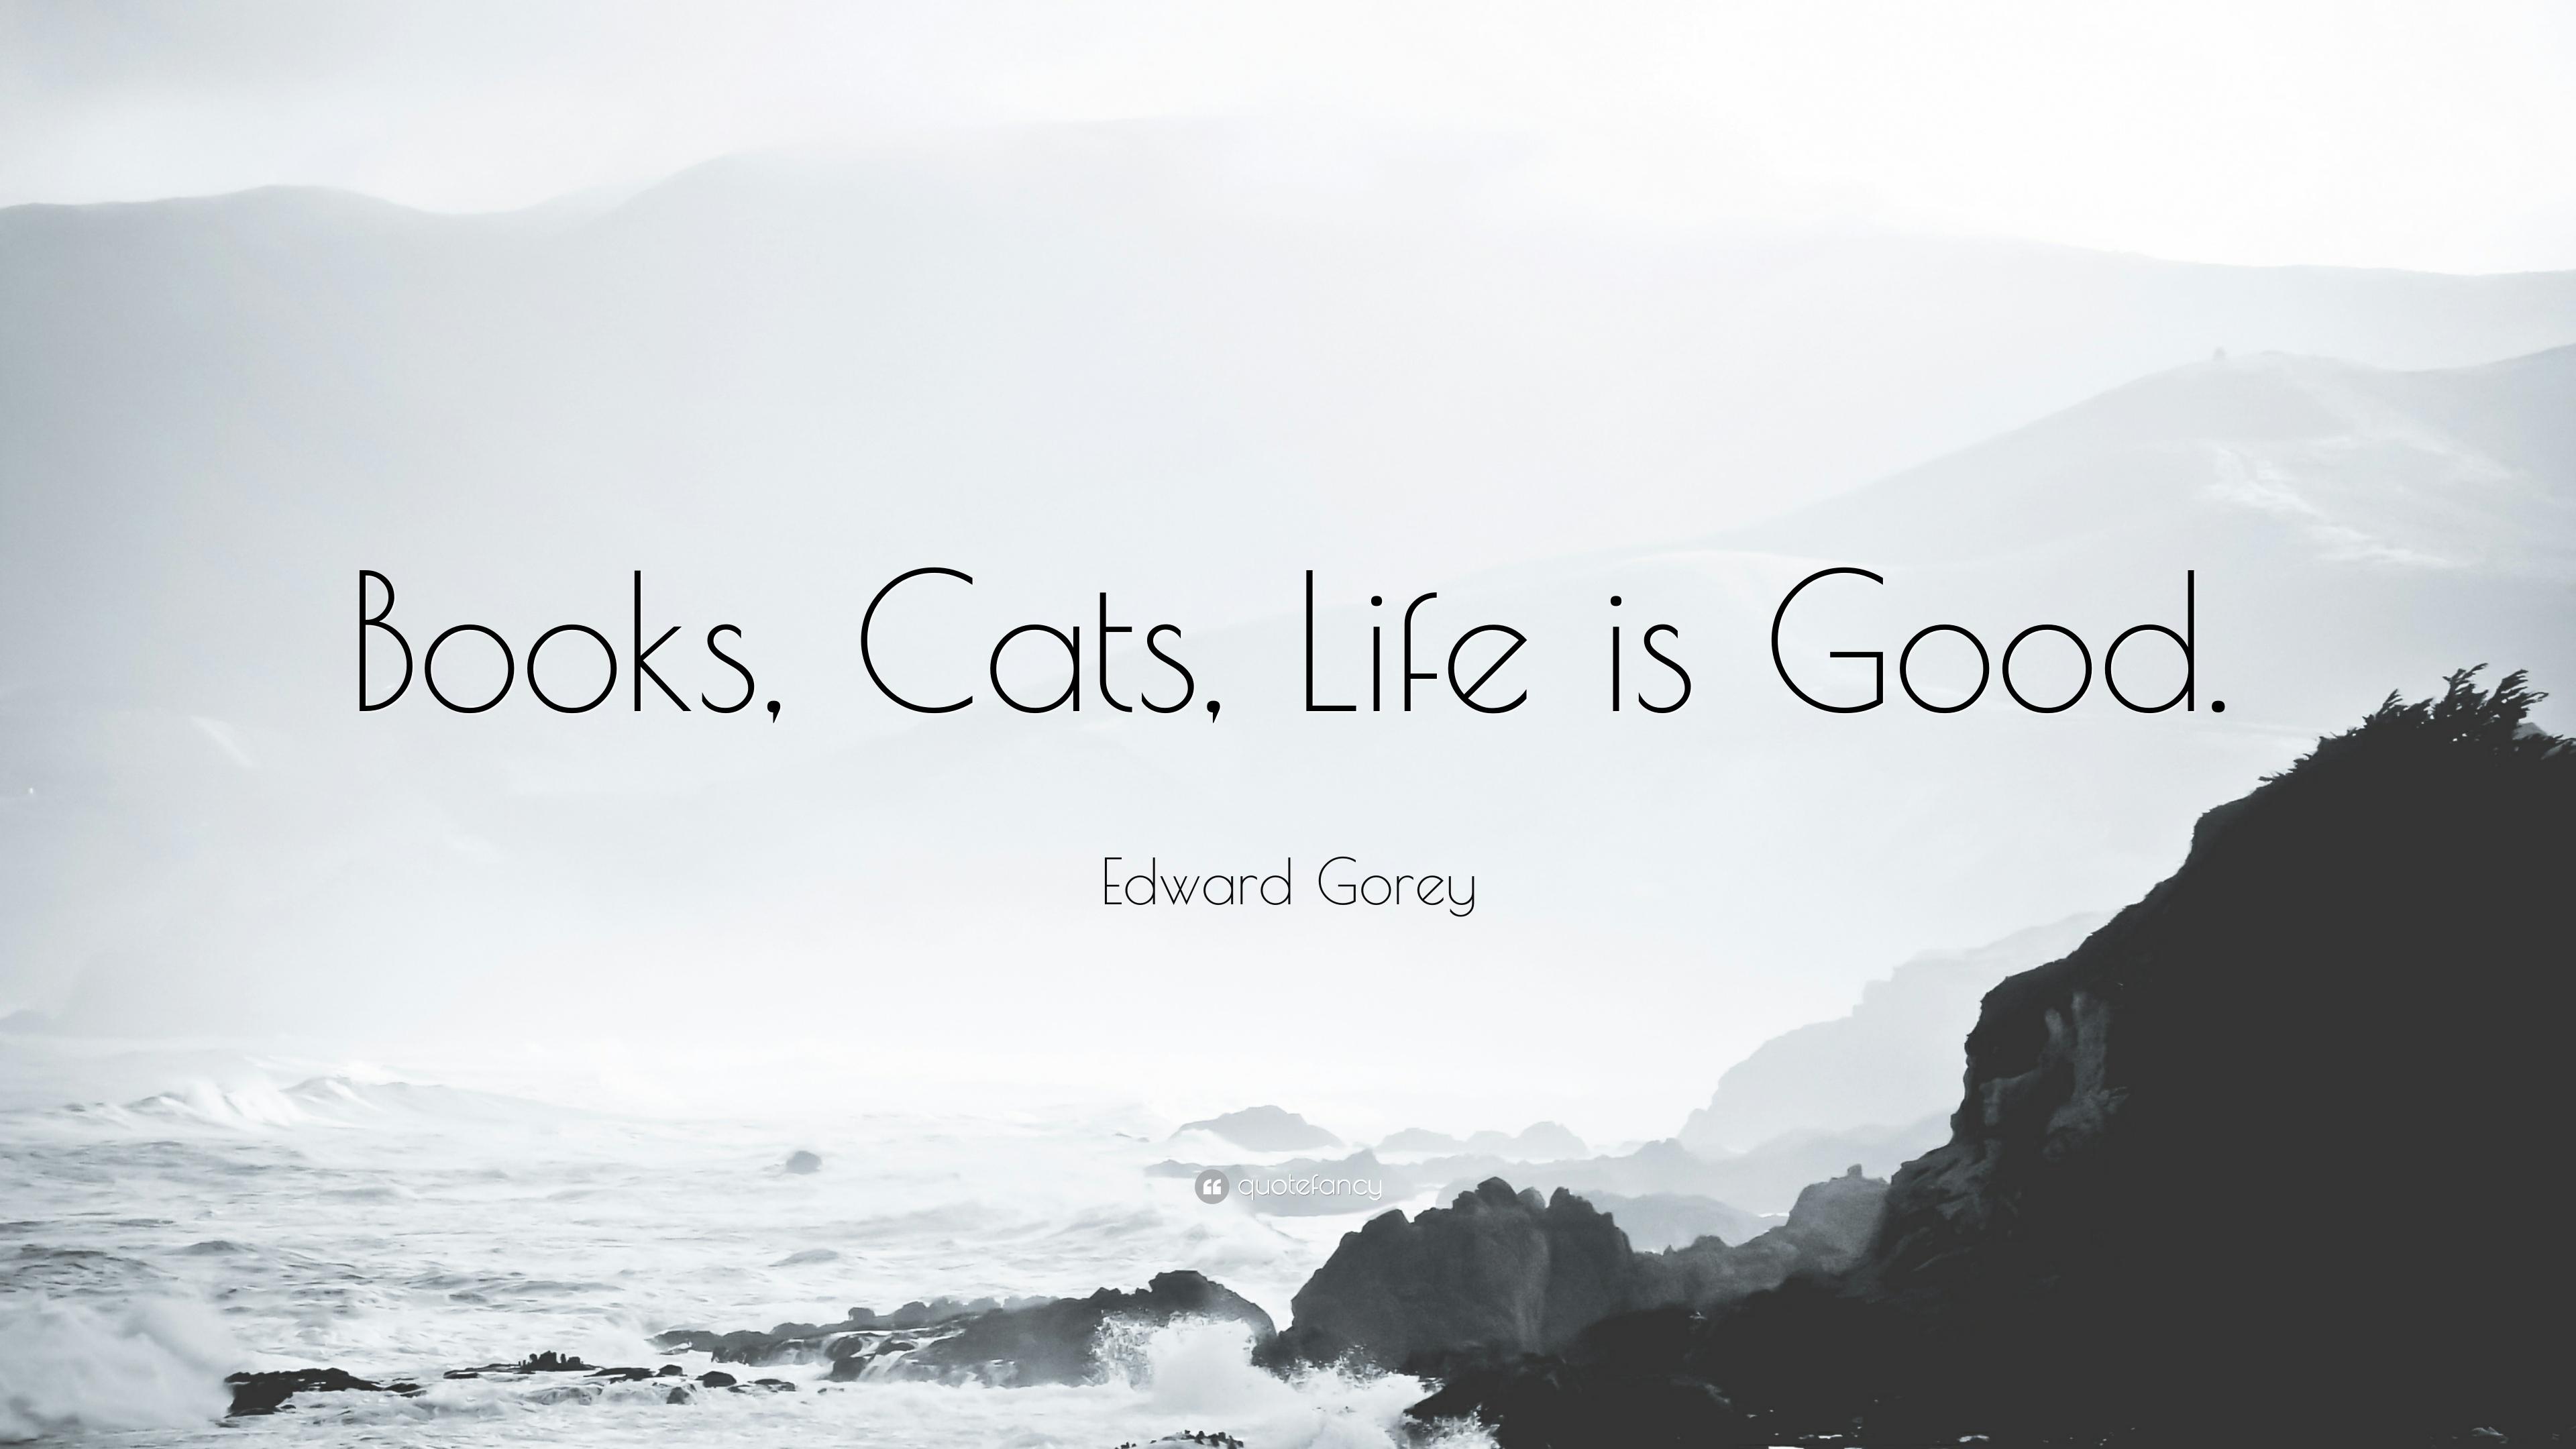 Edward Gorey Quote: “Books, Cats, Life is Good.” 11 wallpaper